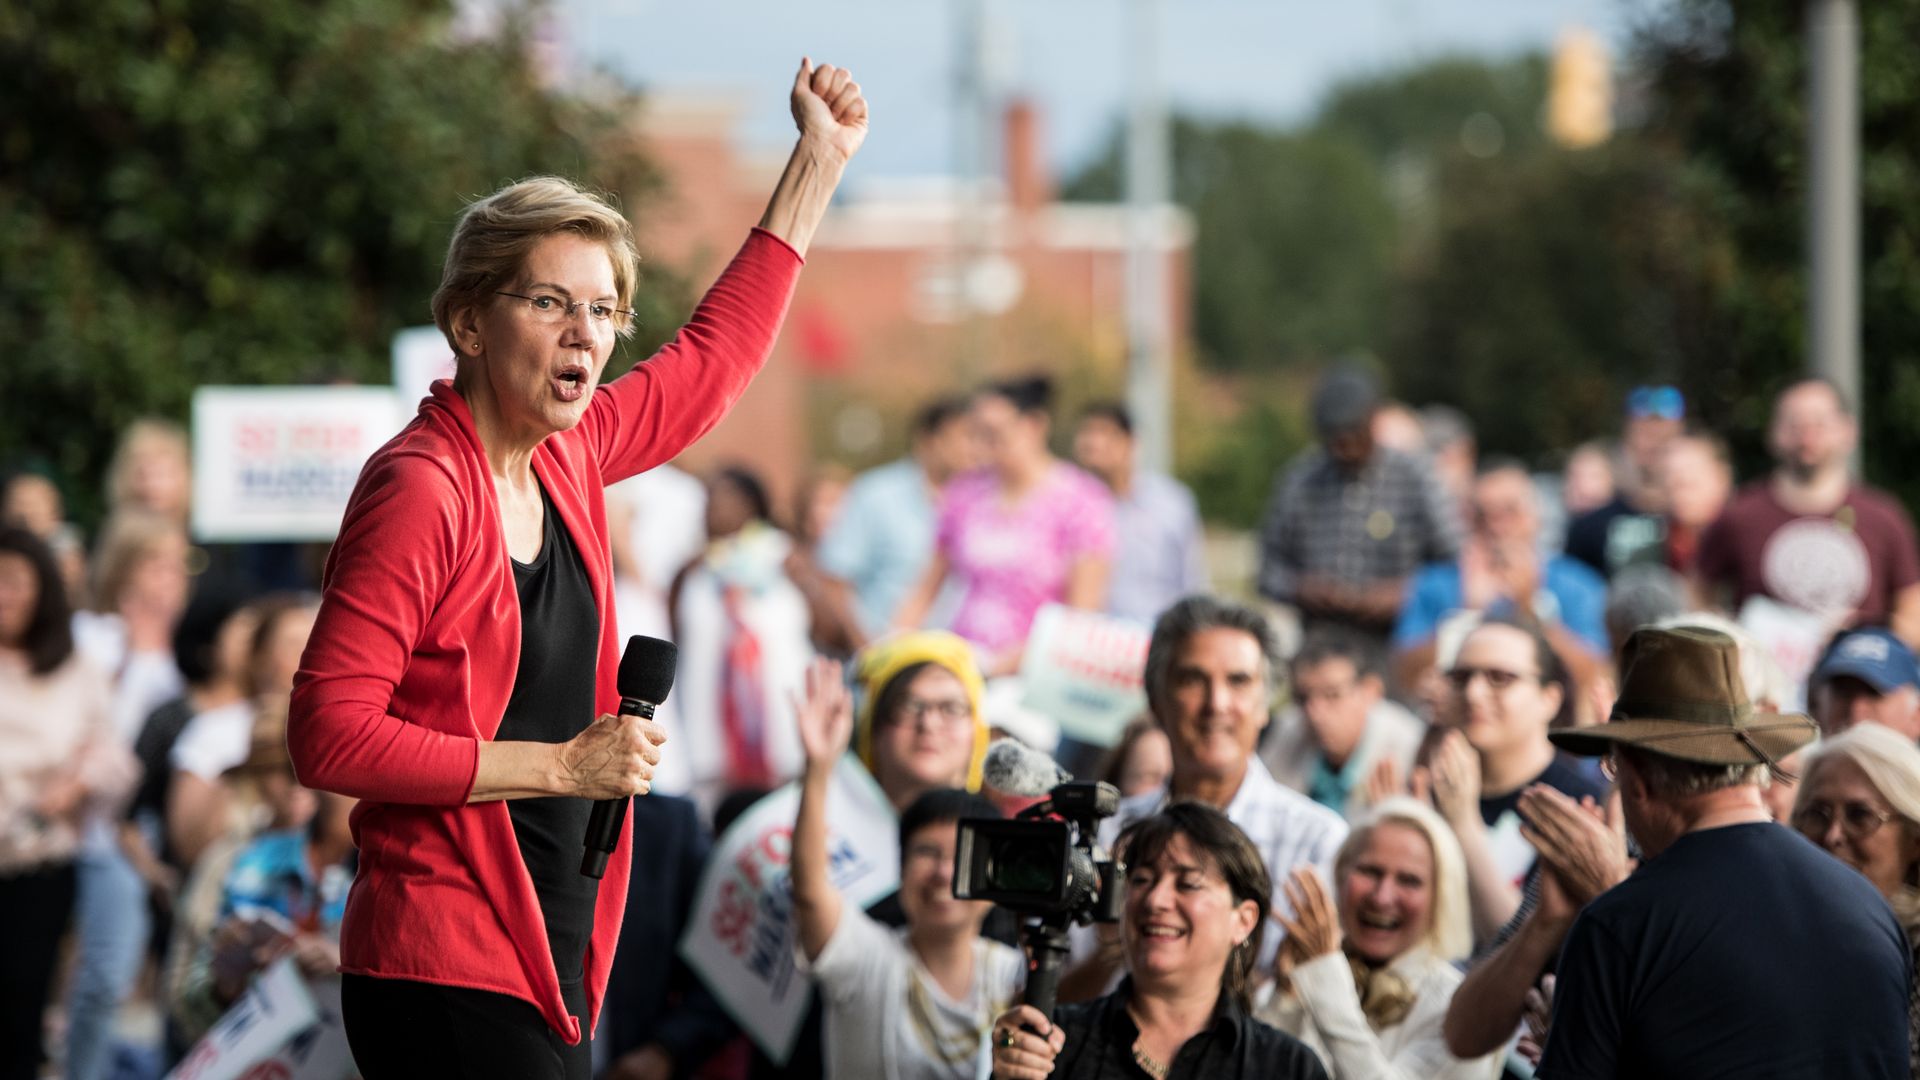 Elizabeth Warren, with her arm raised in a fist, speaks before a rally.